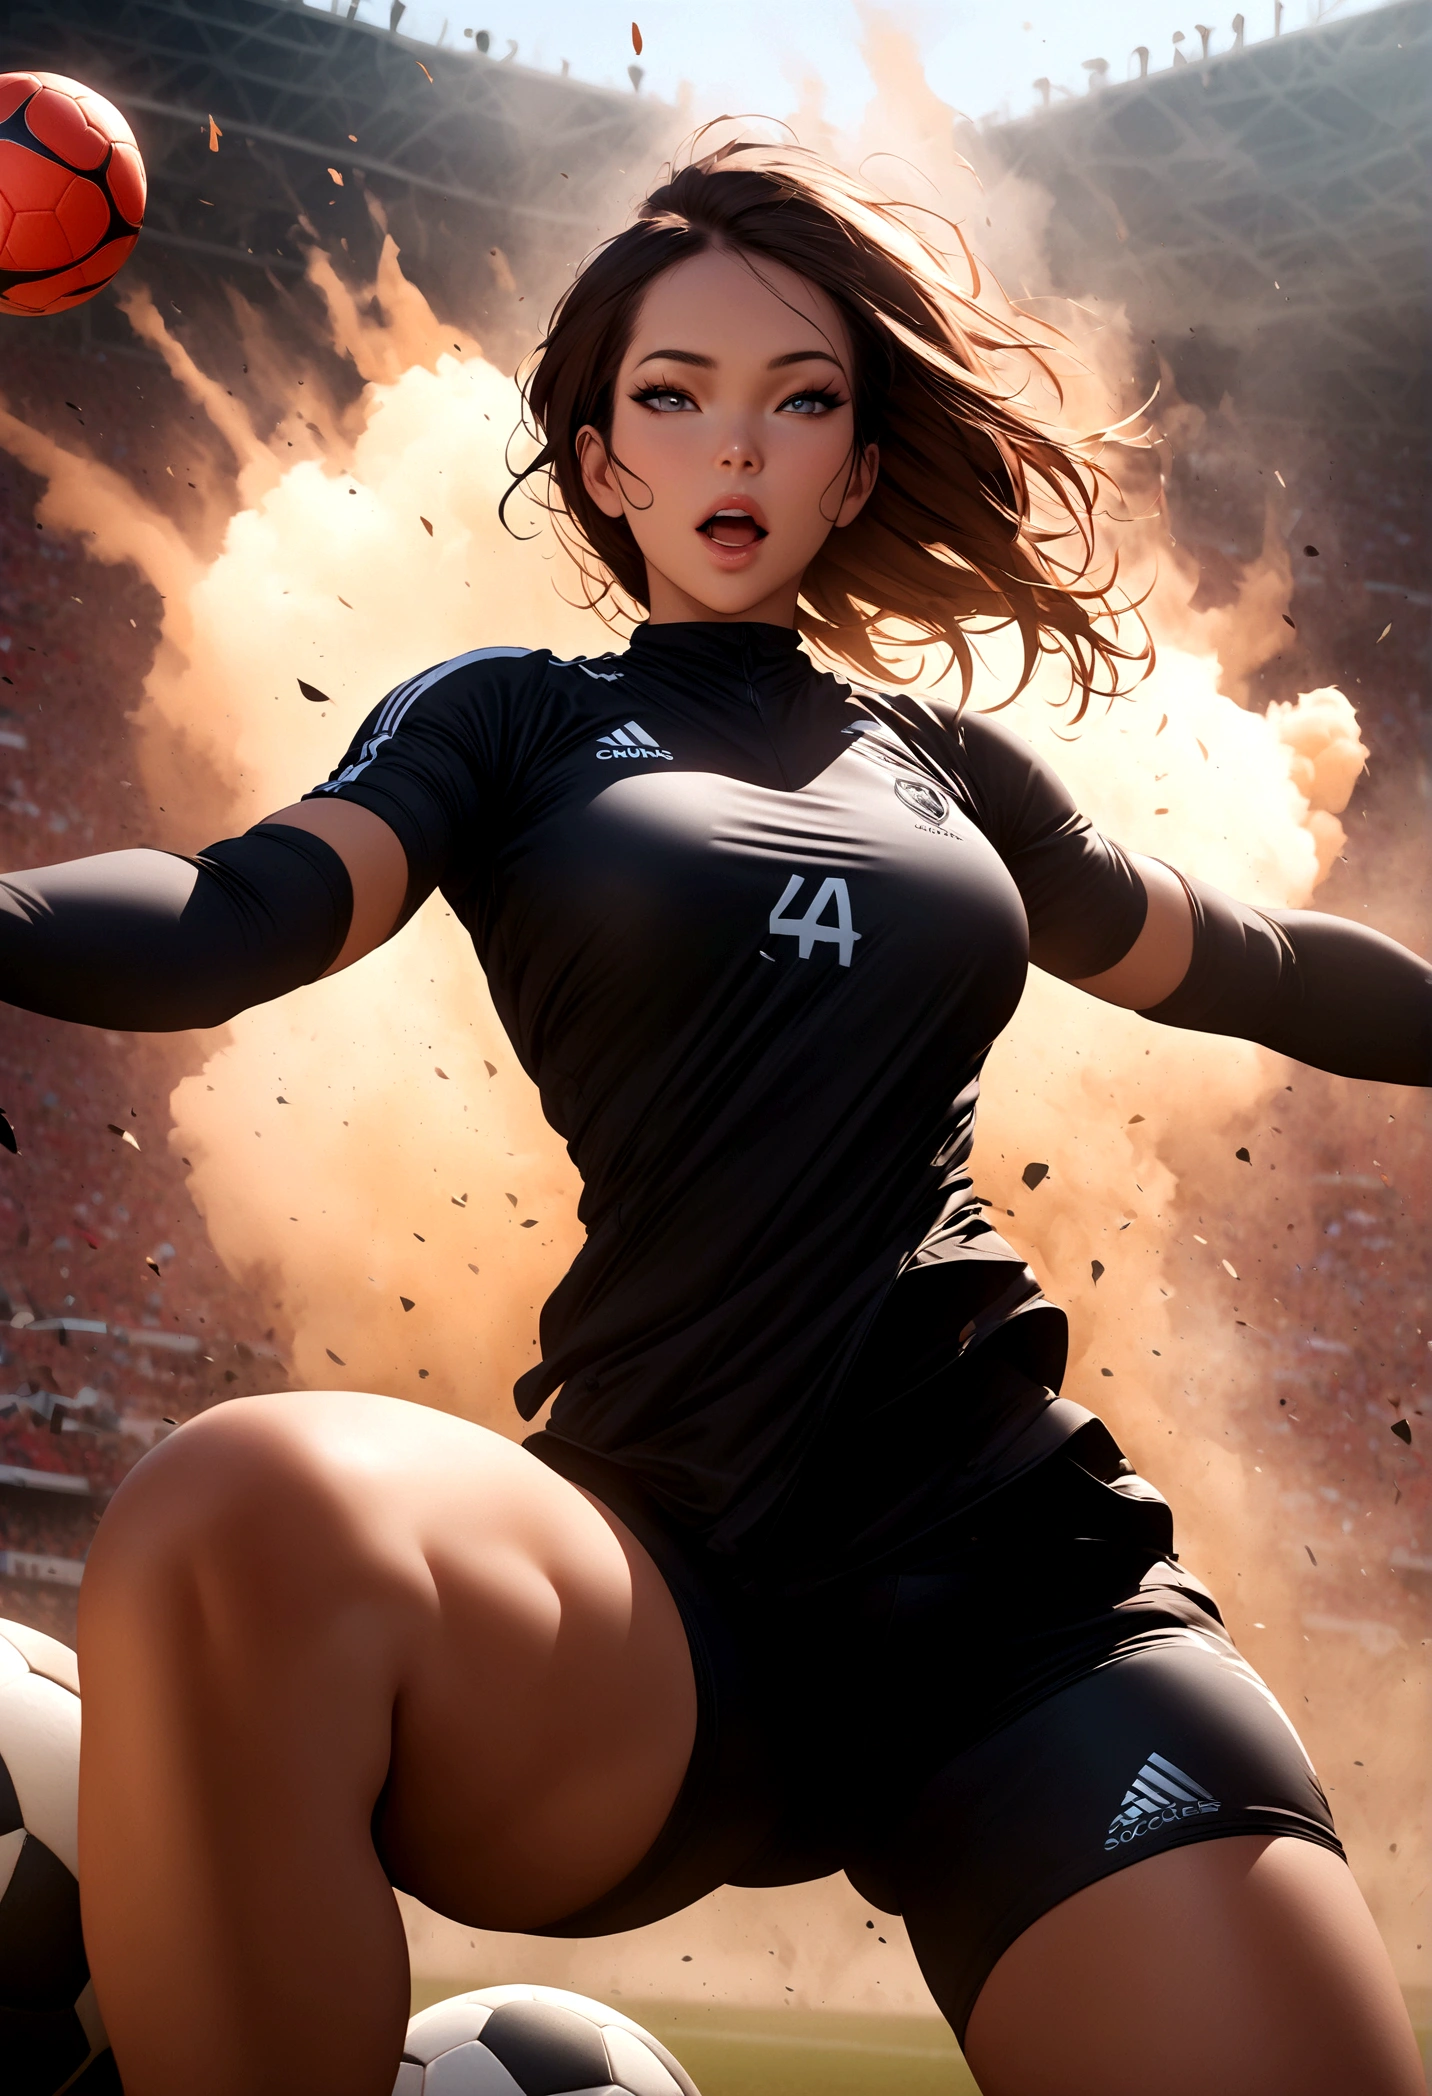 ((Masterpiece, top quality, high resolution)), ((highly detailed CG unified 8K wallpaper)), (huge stunning goddess shot, very hot and sexy, jaw-dropping beauty, perfect proportions, beautiful body, slim body beauty:1.1), soccer players in action on a soccer field during a game, soccer, sports photography, playing soccer, soccer player, sport game, sport photography, shutterstock, football, the best ever, attacking, cover shot, interrupting the big game, football player, professional sports style, trending dribble, best on adobe stock, by Wayne England, action shot, dynamic action shot, 